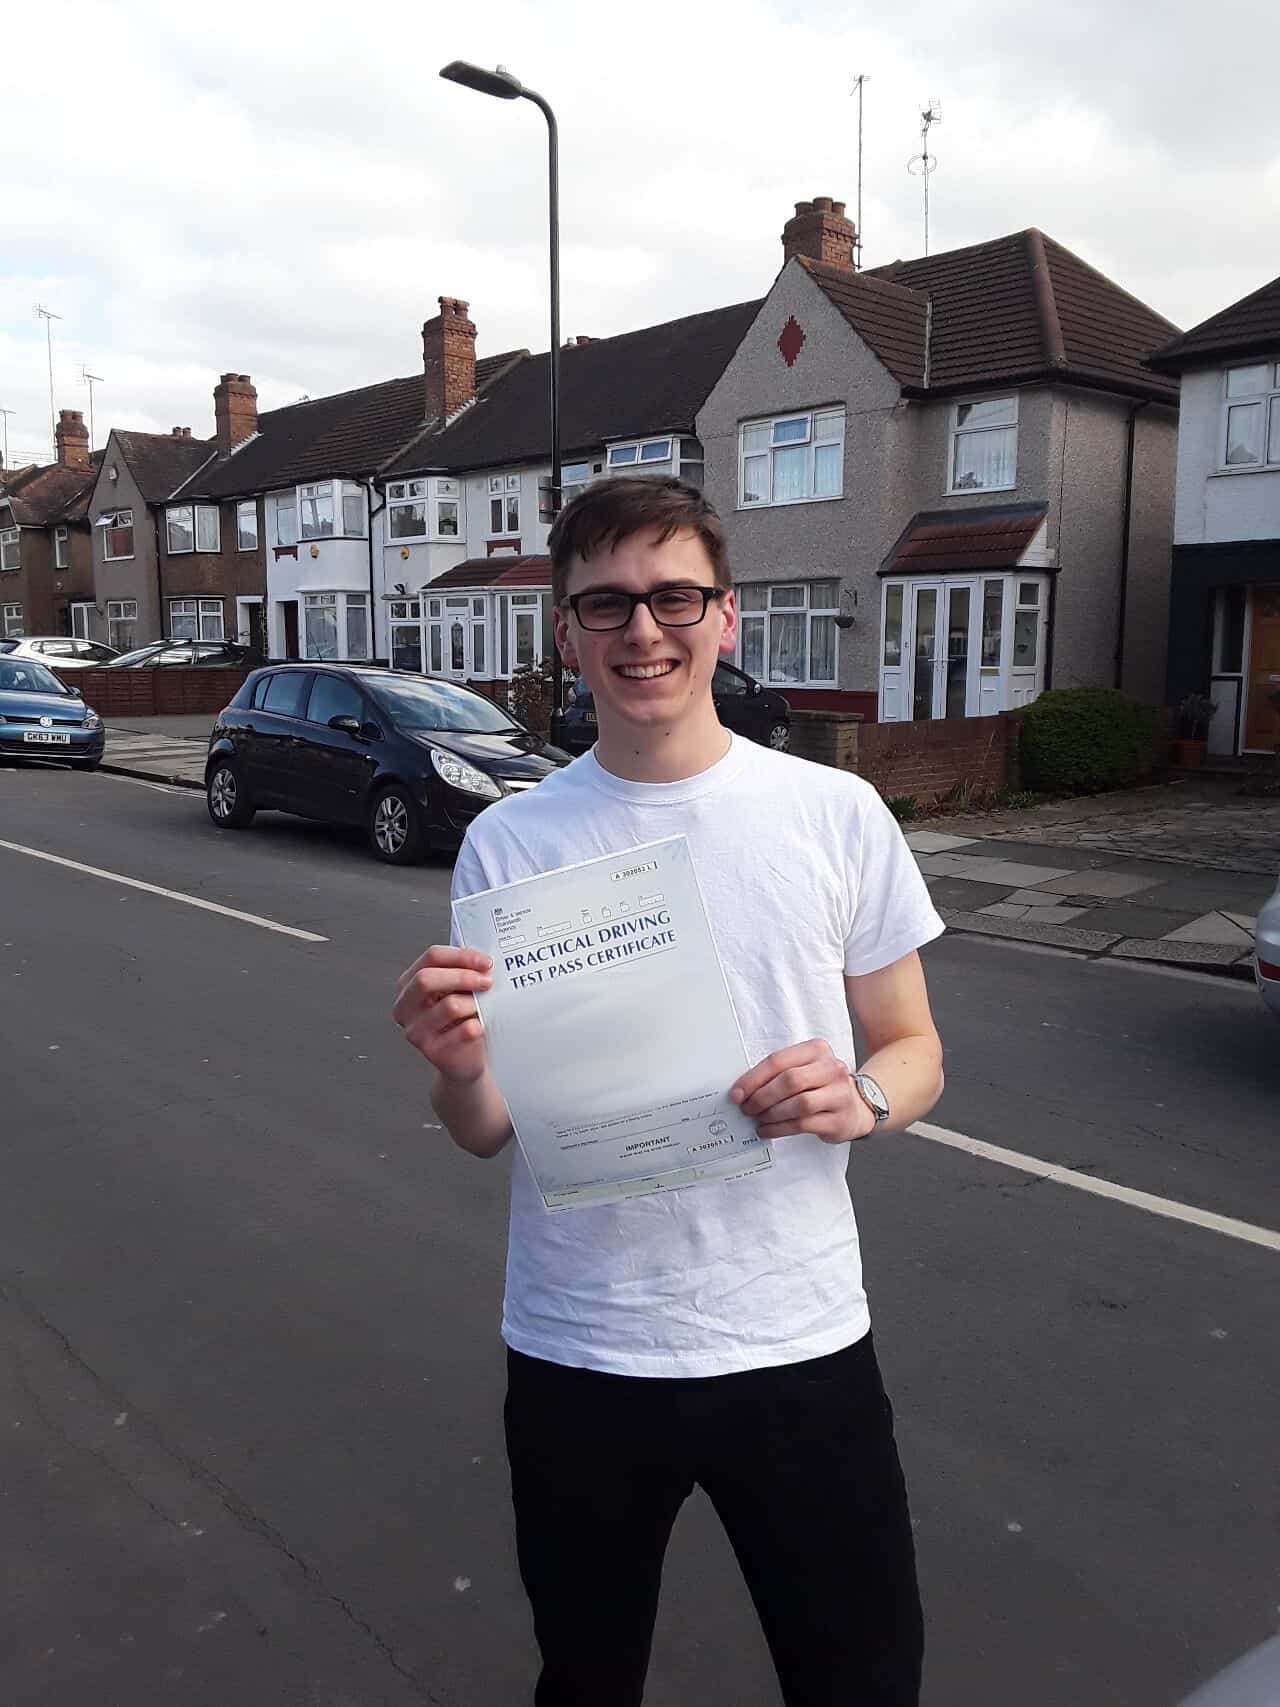 Congratulations to Matthew in London W5 on passing your practical test with the help of Chris at Intensive Courses